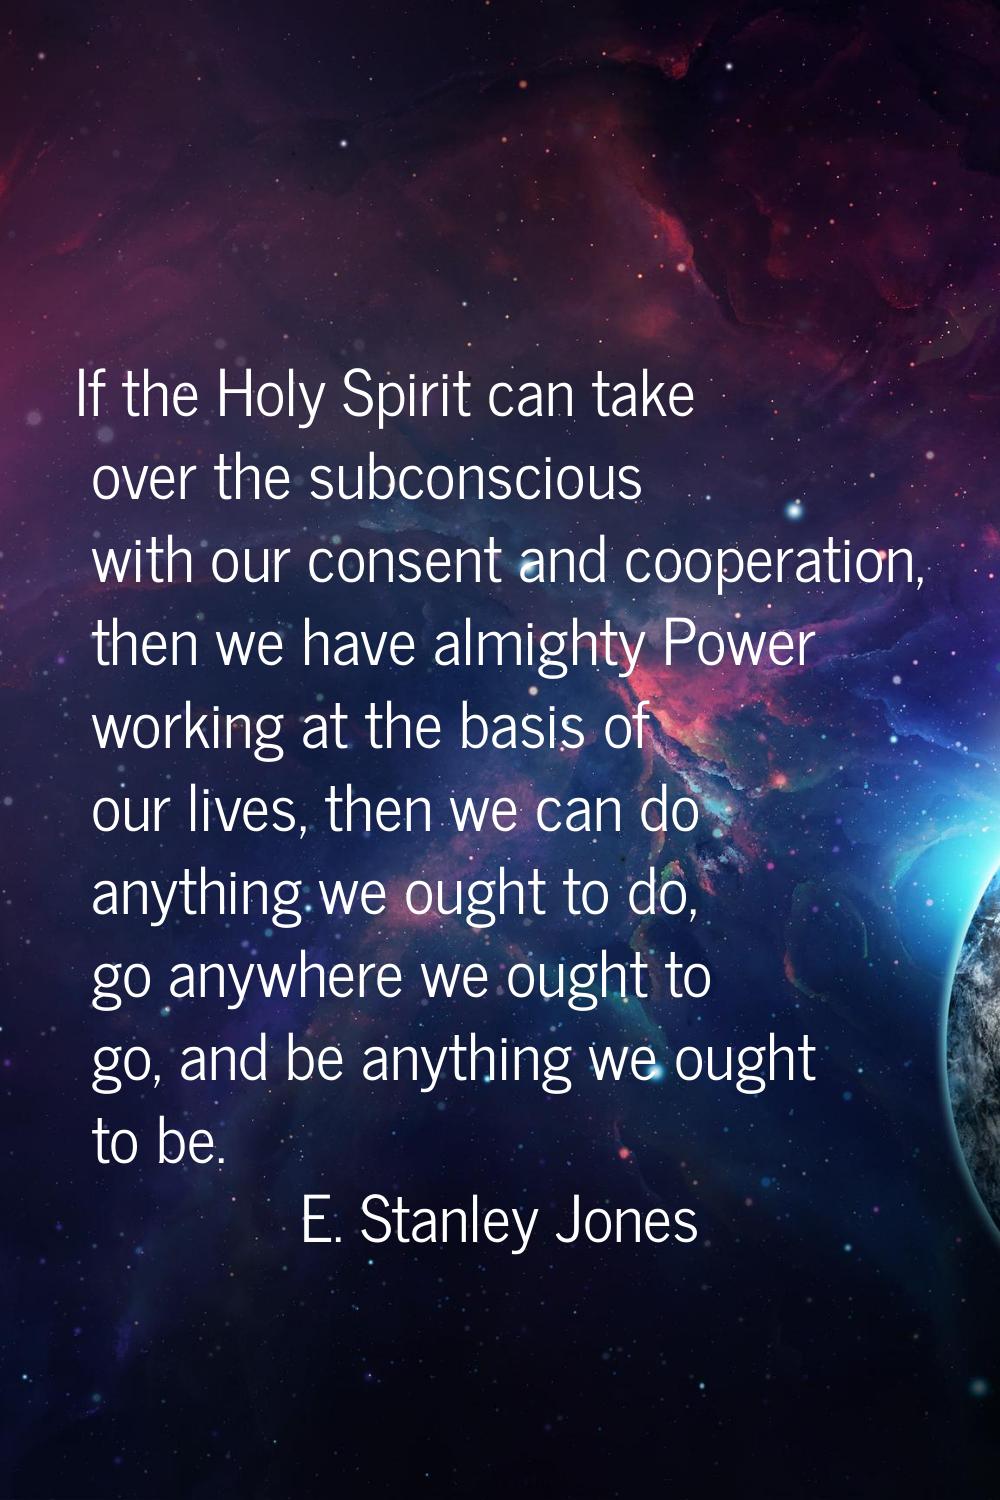 If the Holy Spirit can take over the subconscious with our consent and cooperation, then we have al